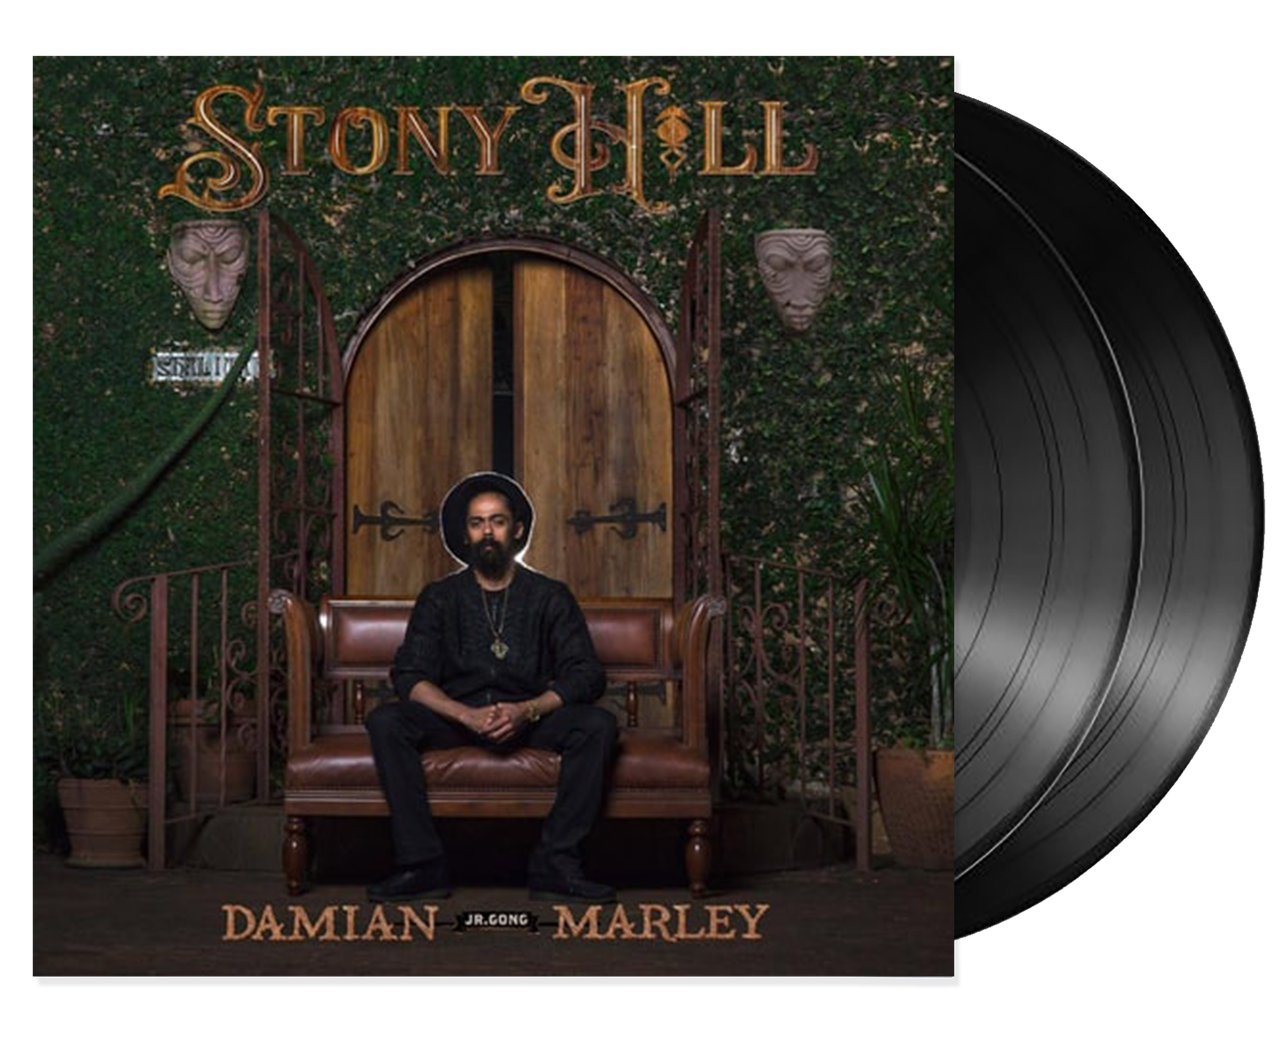 Damian “Jr. Gong” Marley Stony Hill Vinyl LP Set Out Today - VP 